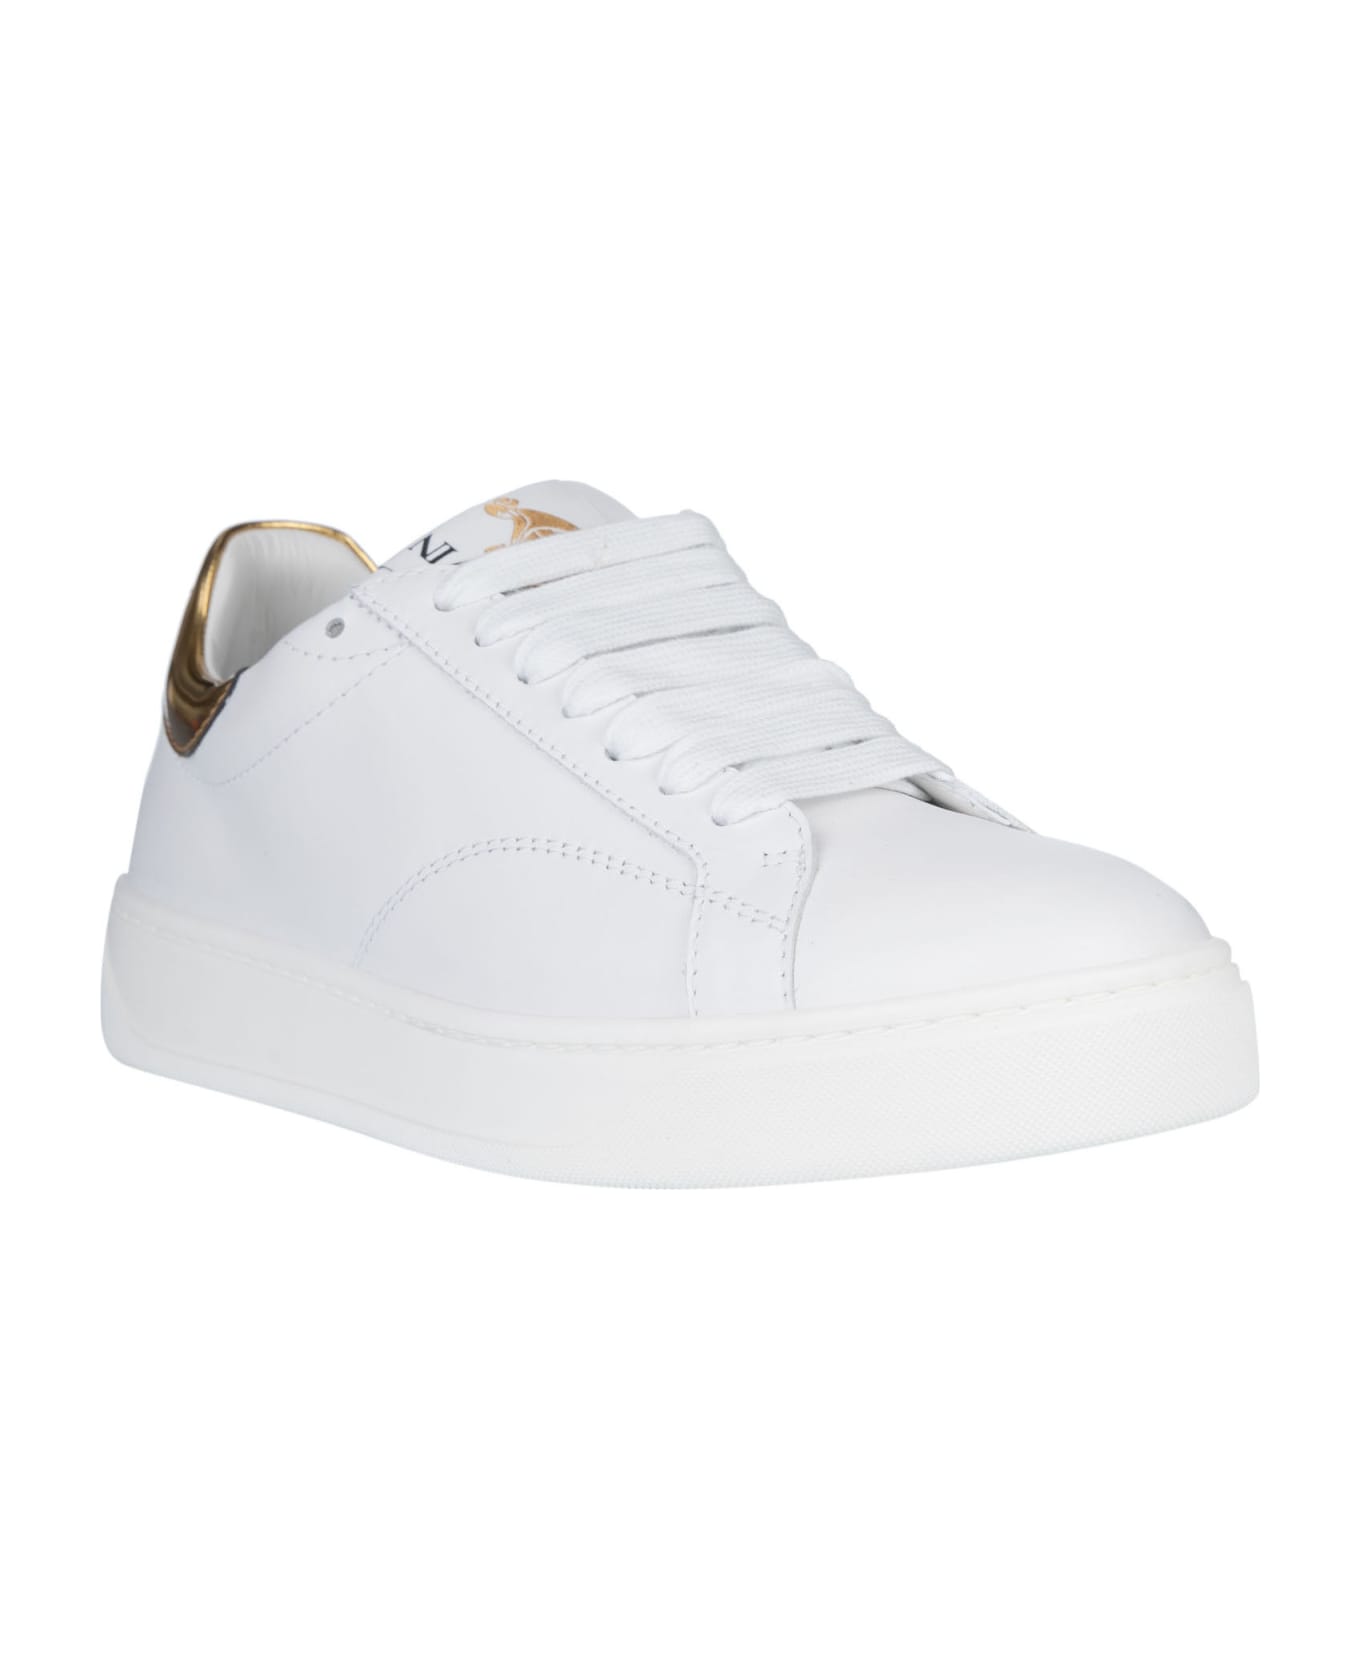 Lanvin Ddb0 Sneakers - White/Gold スニーカー